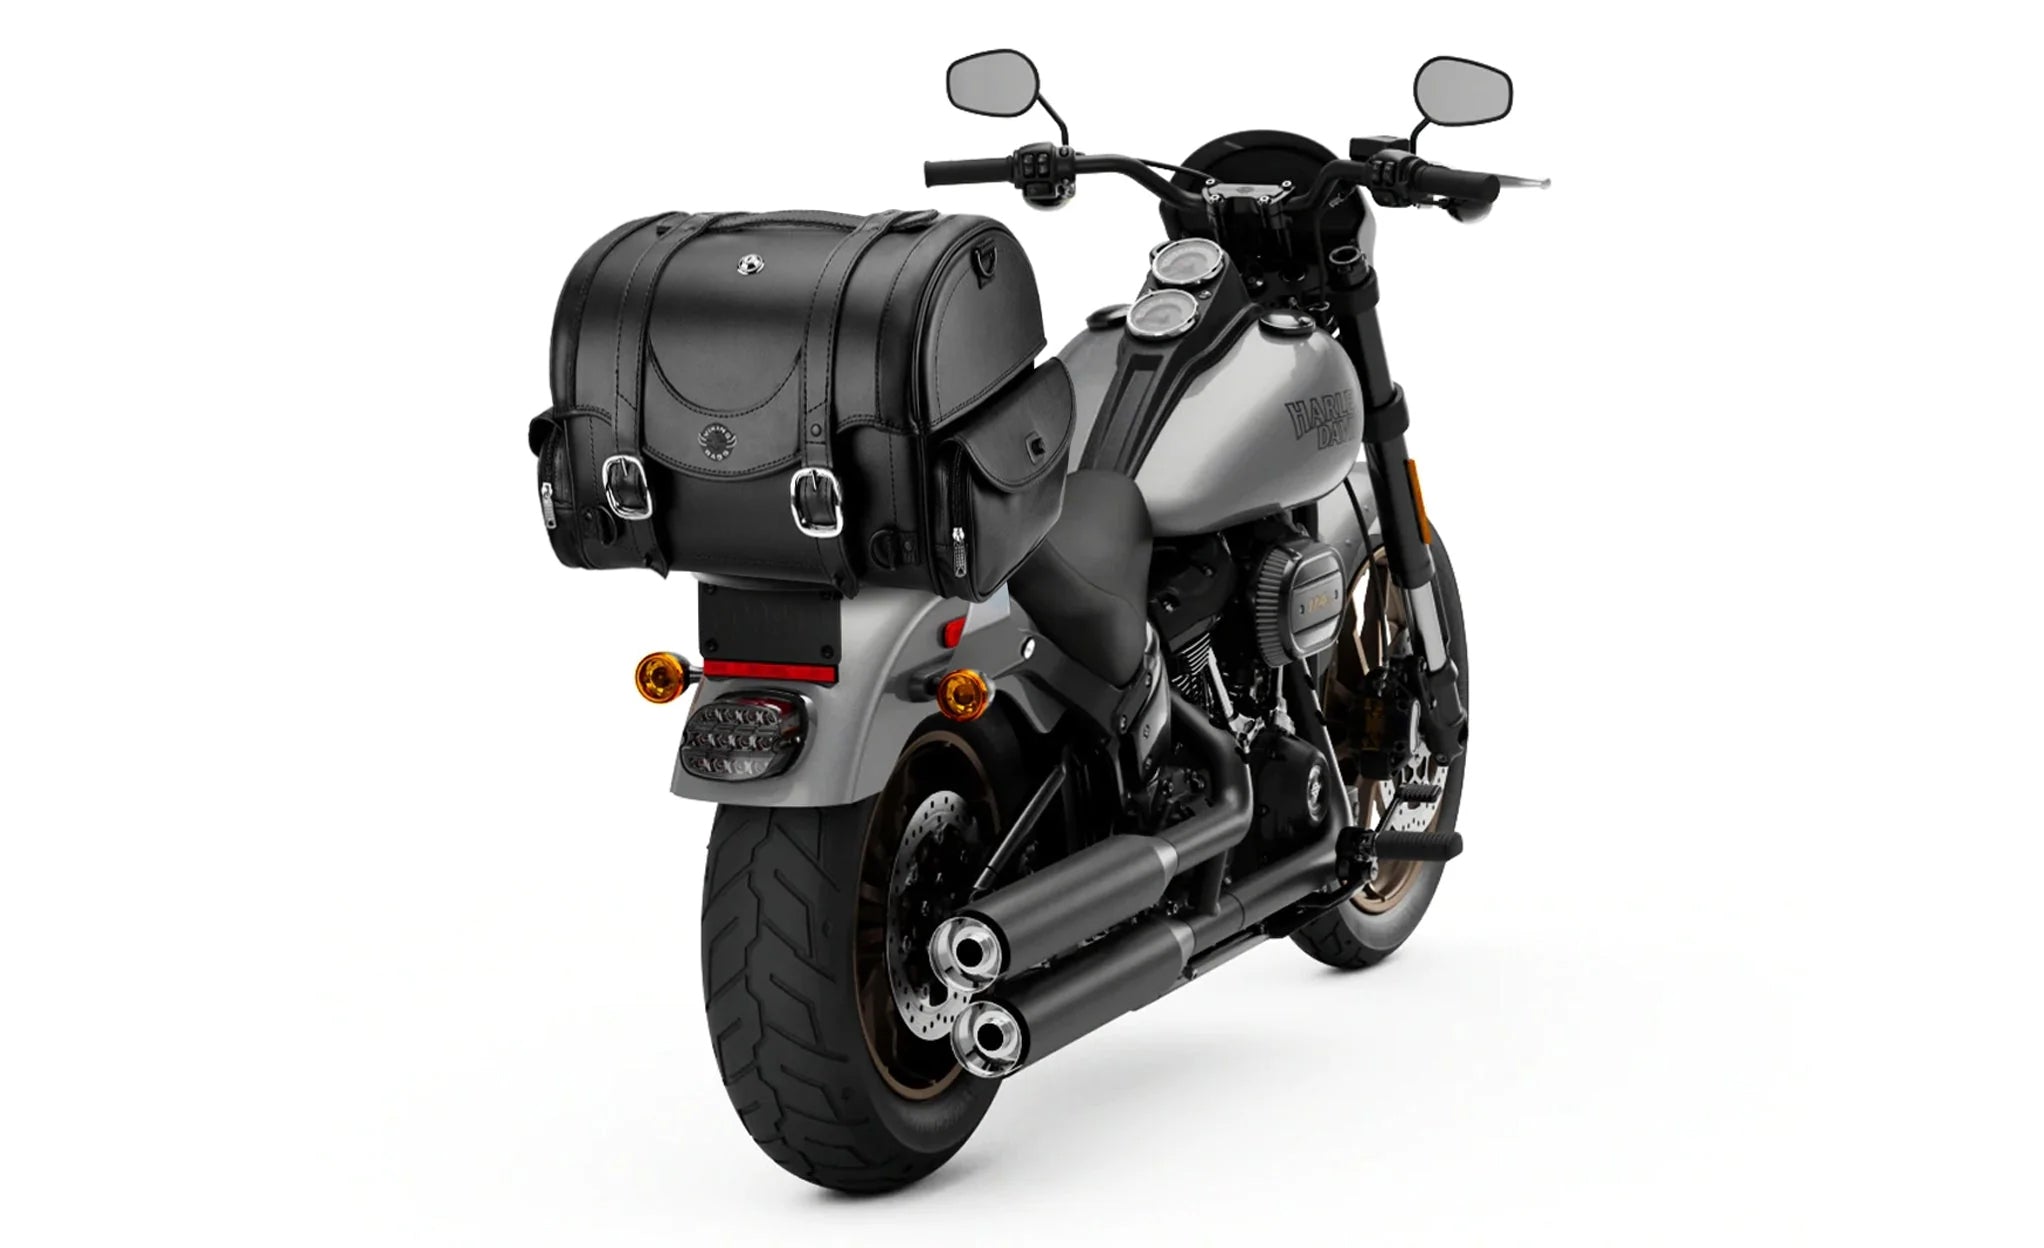 21L - Century Medium Hysoung Leather Motorcycle Tail Bag on Bike Photo @expand